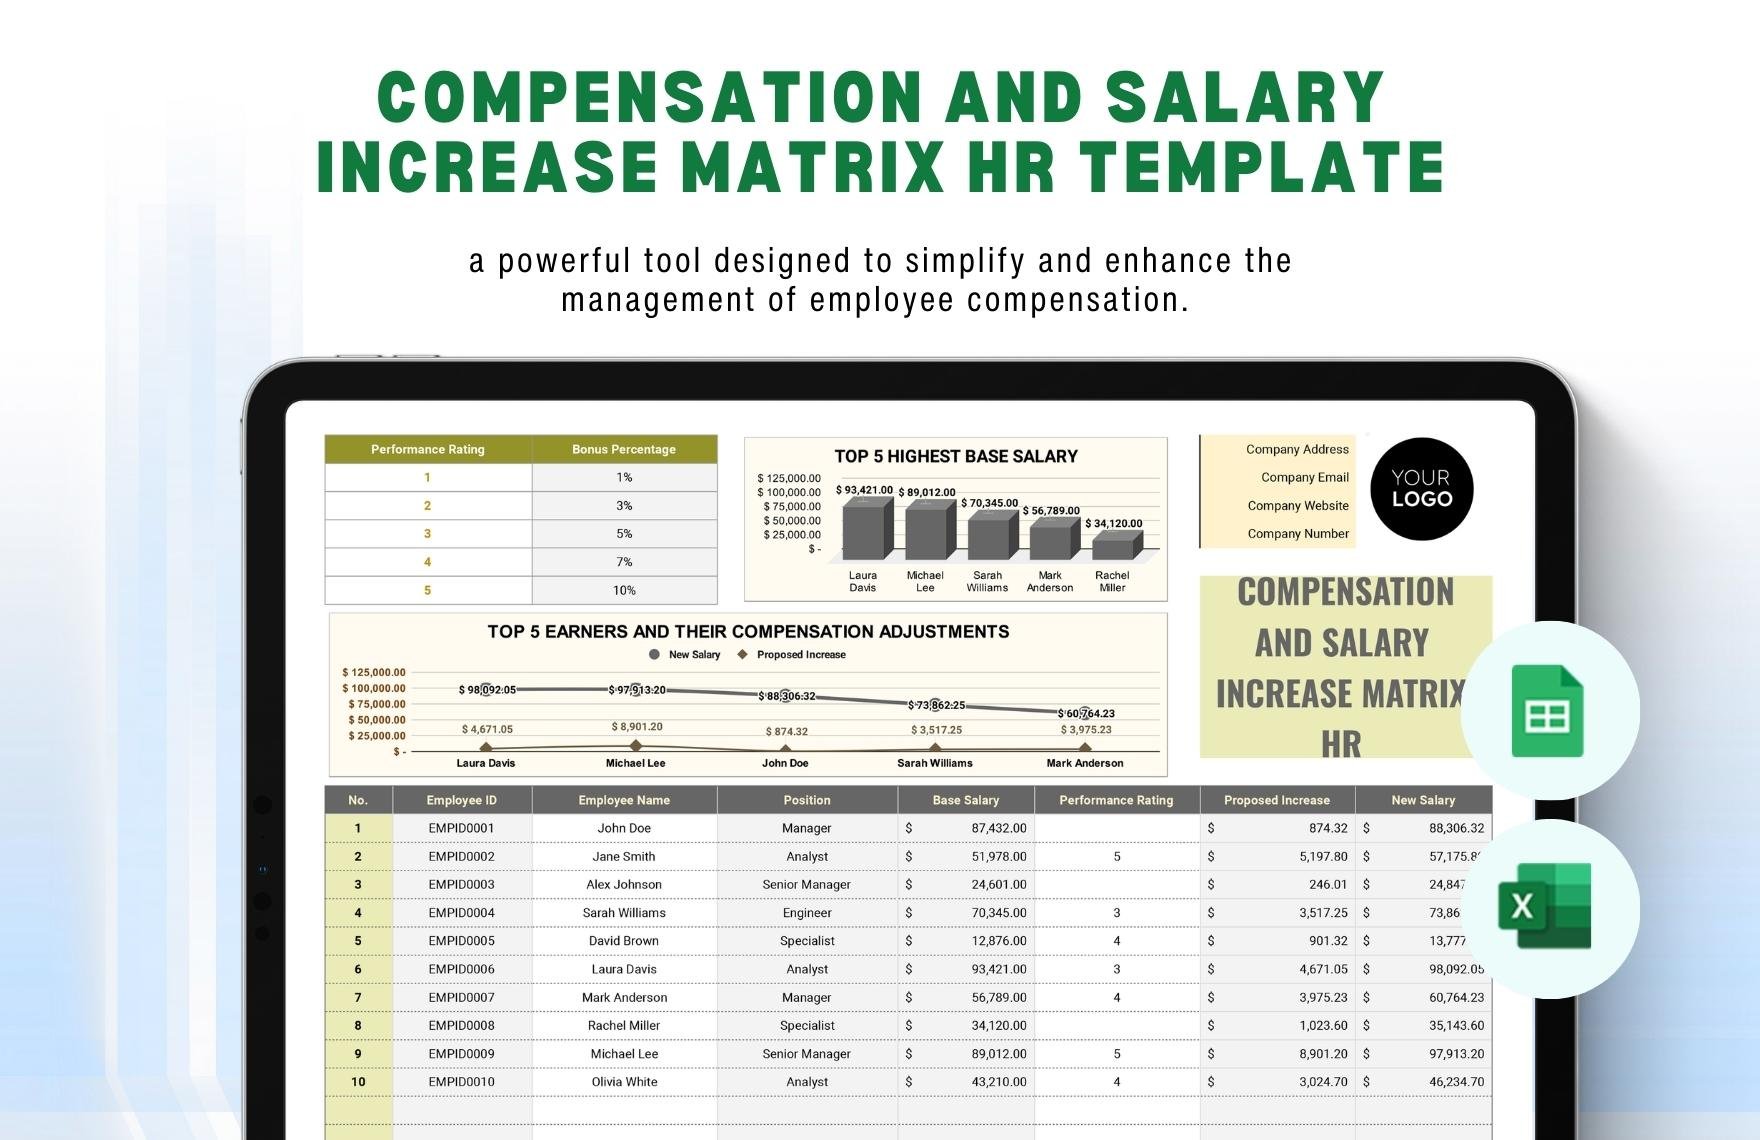 Compensation and Salary Increase Matrix HR Template